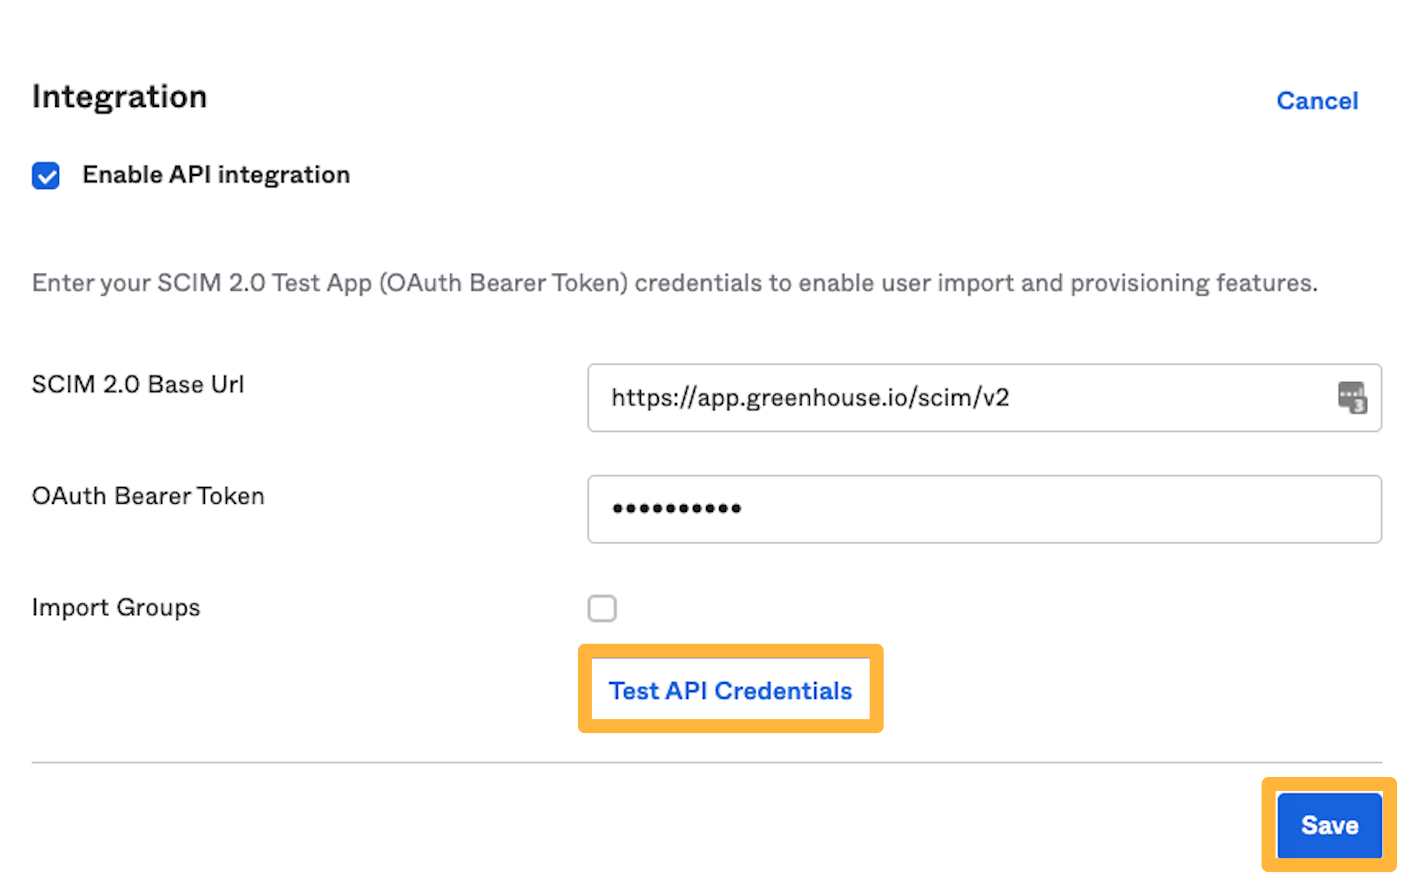 Screenshot of the test API credentials and save buttons in okta